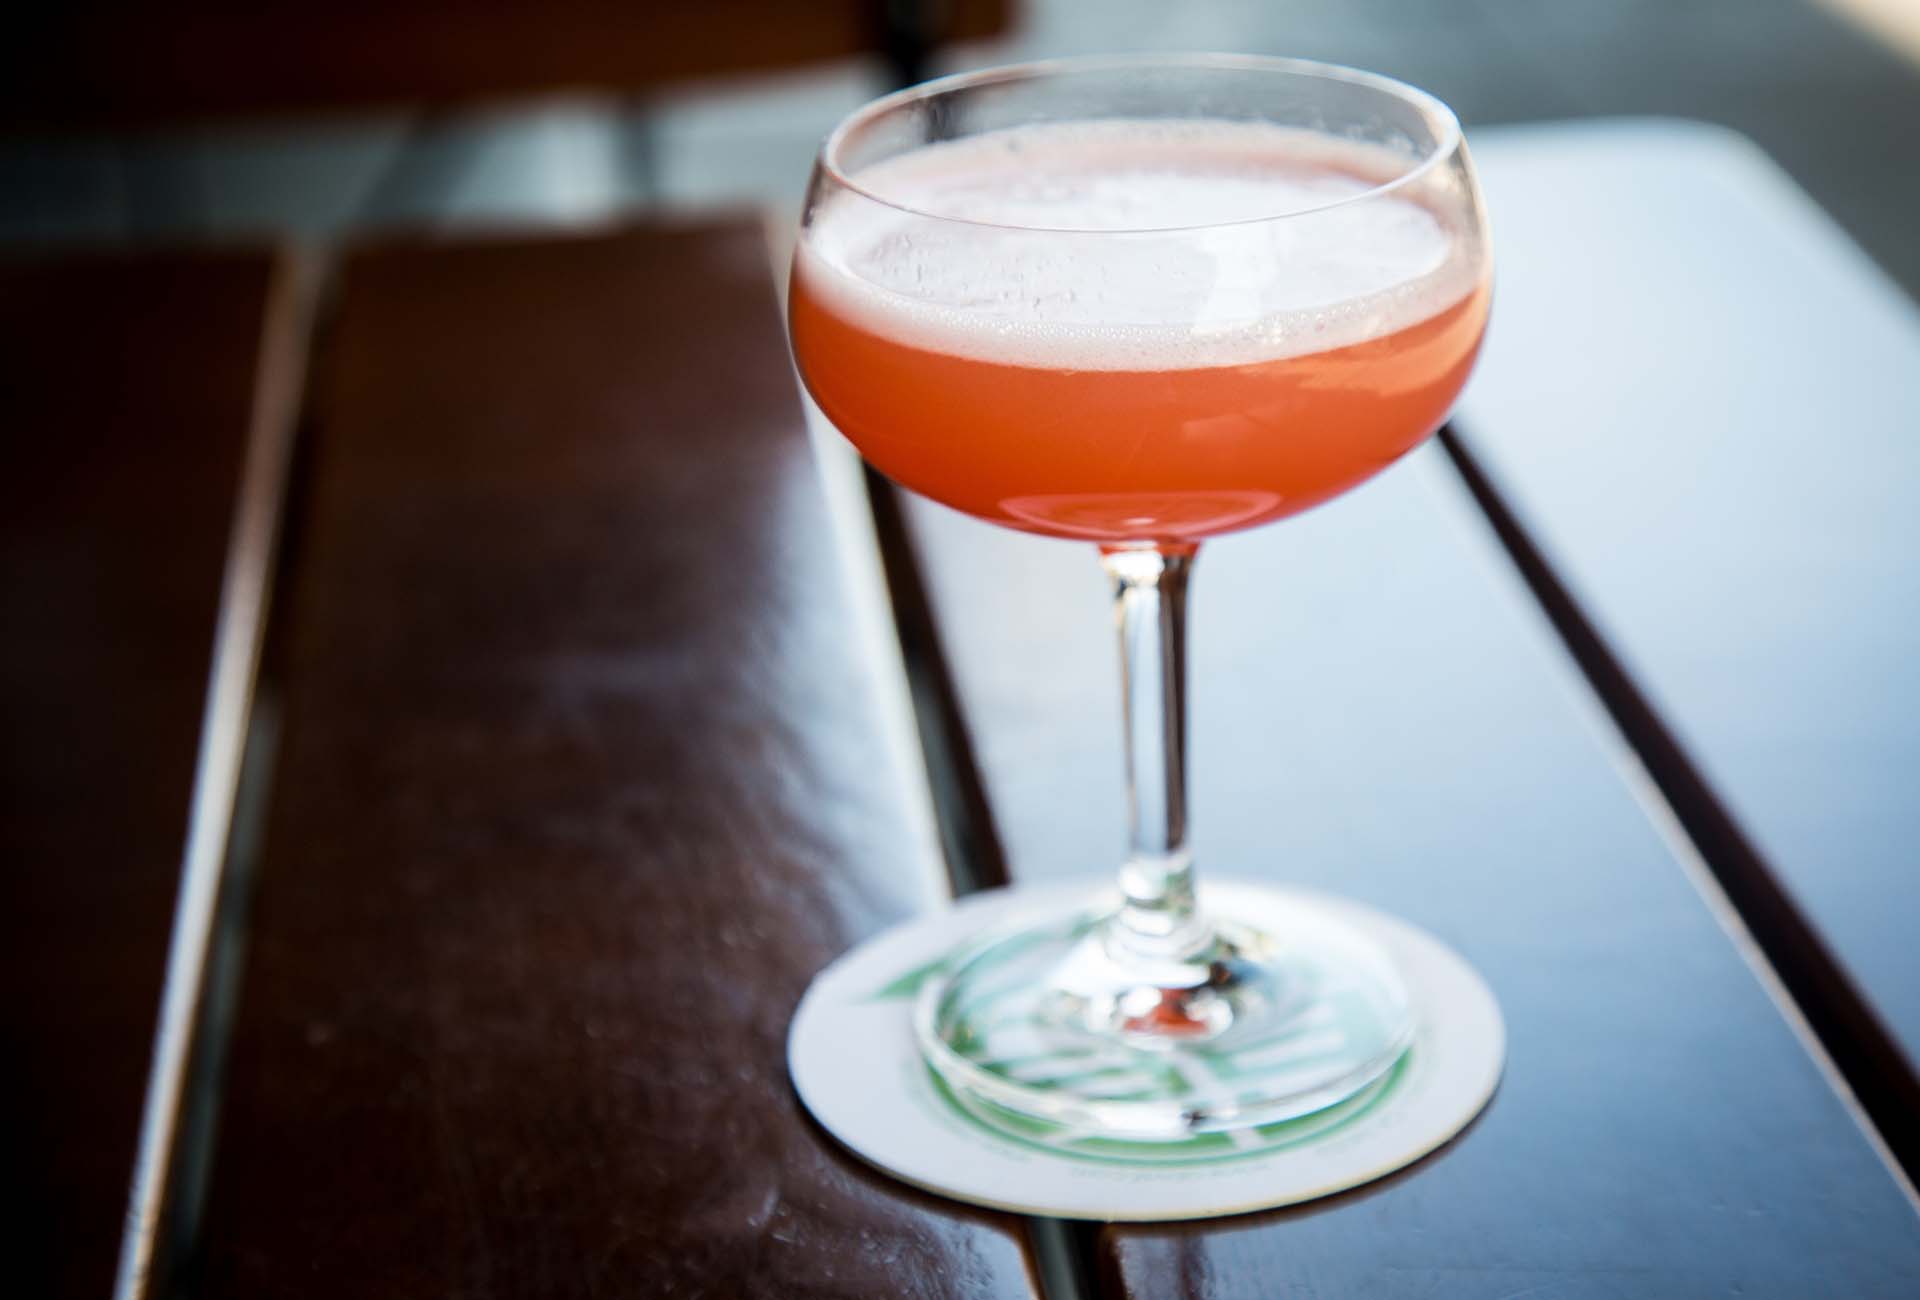 The Pink Flamingo uses Rhum Agricole and house-made aperitivos